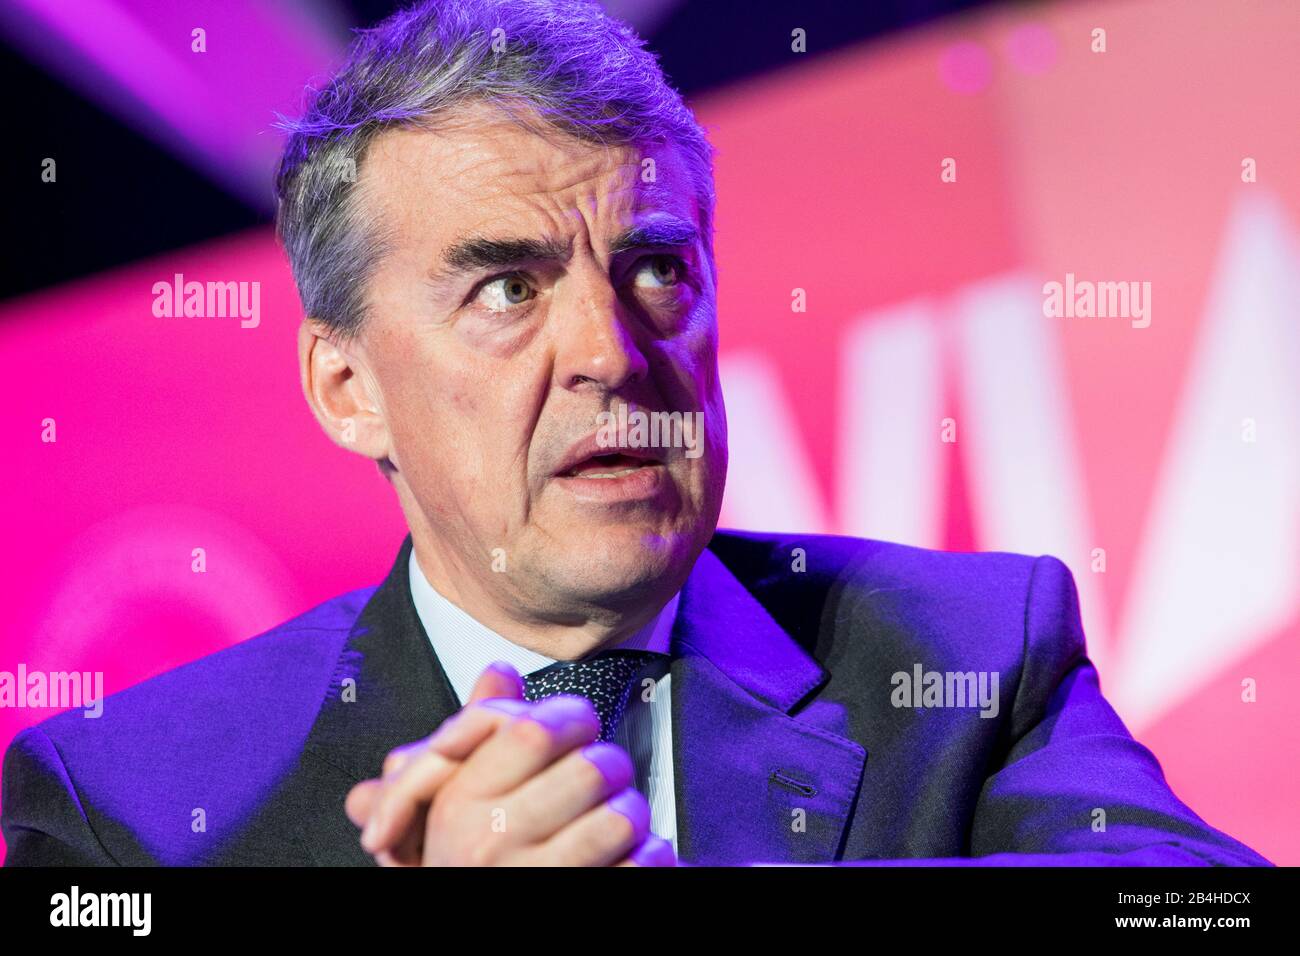 Alexandre de Juniac, Director General and Chief Executive Officer, International Air Transport Association (IATA), speaks at the U.S. Chamber of Comme Stock Photo